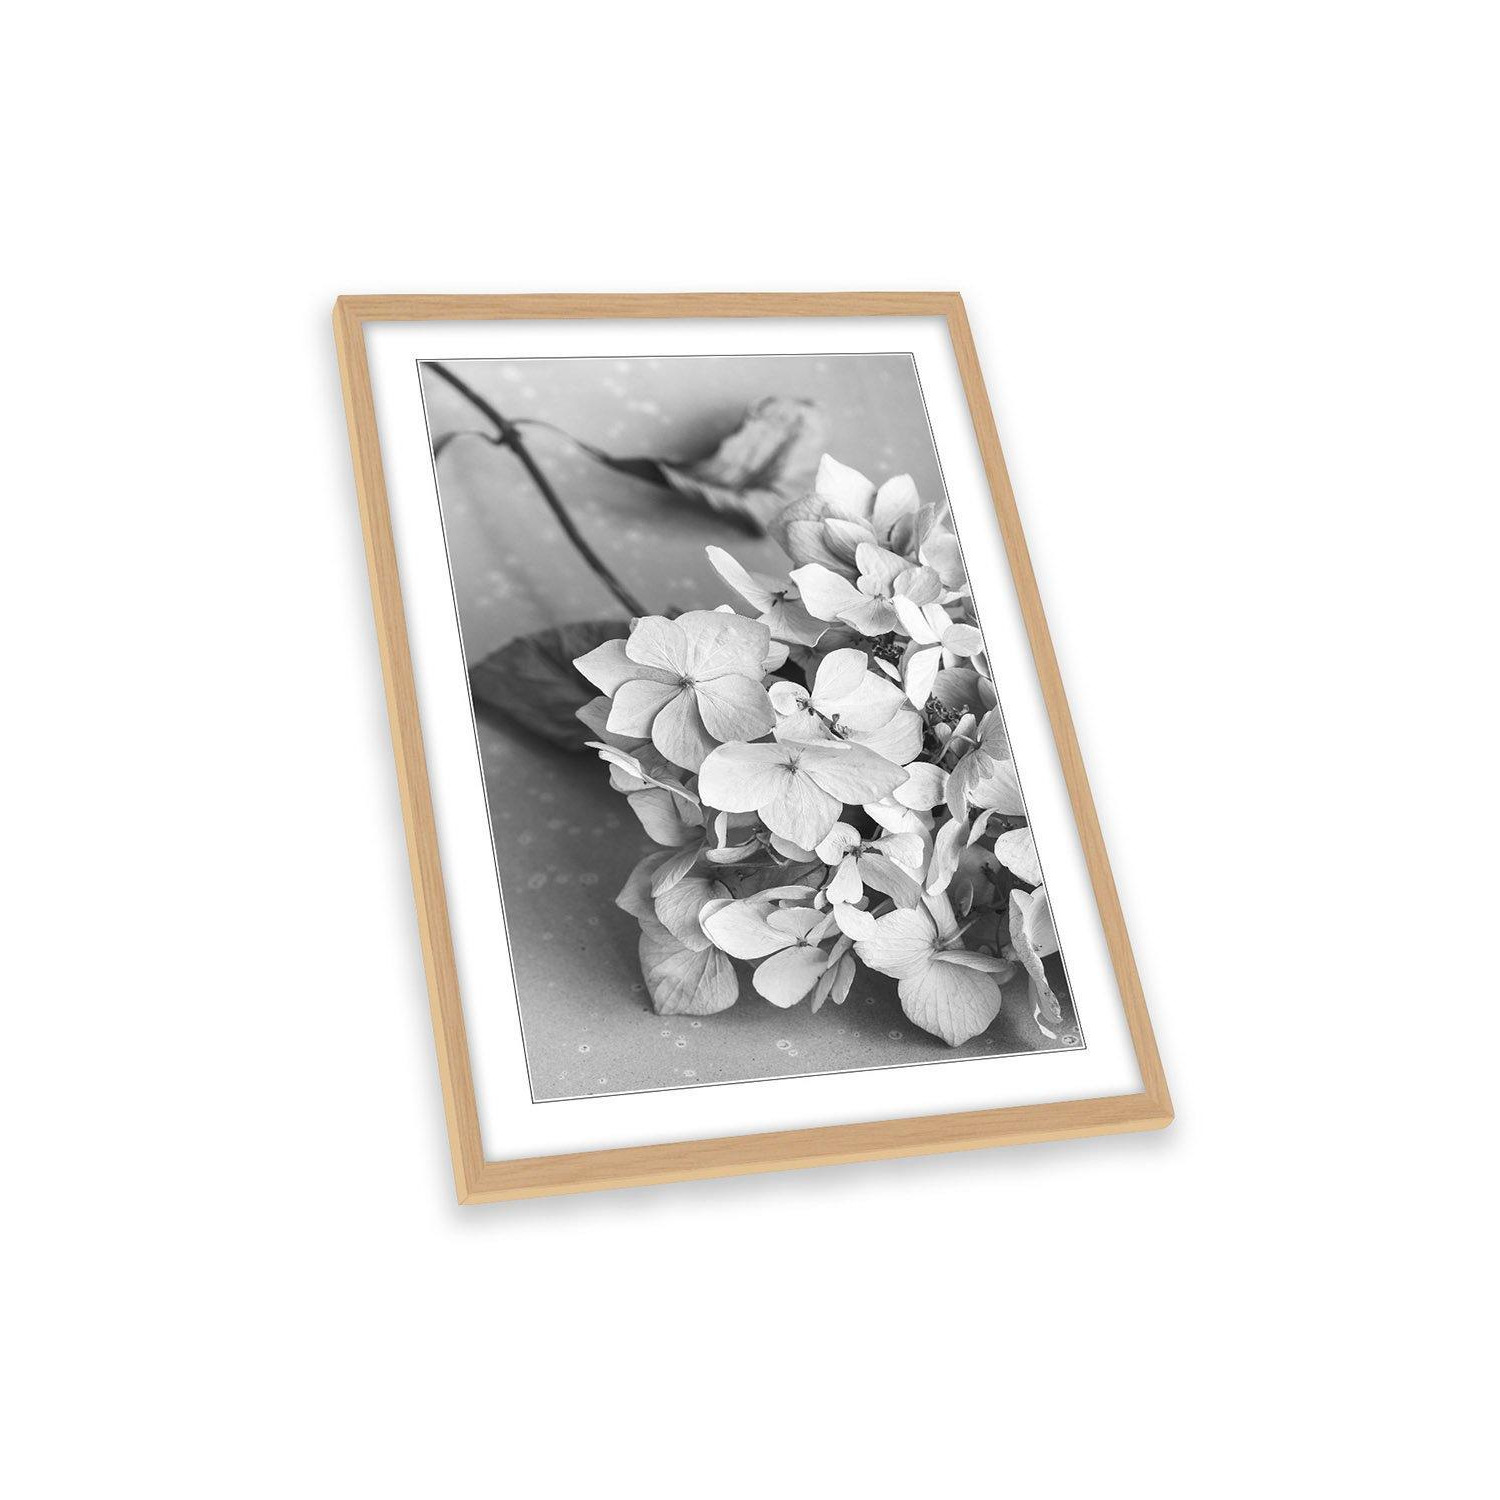 Grey Floral Flowers Still Life Framed Art Print Picture Wall Artwork - (W)26cm x (H)35cm - image 1